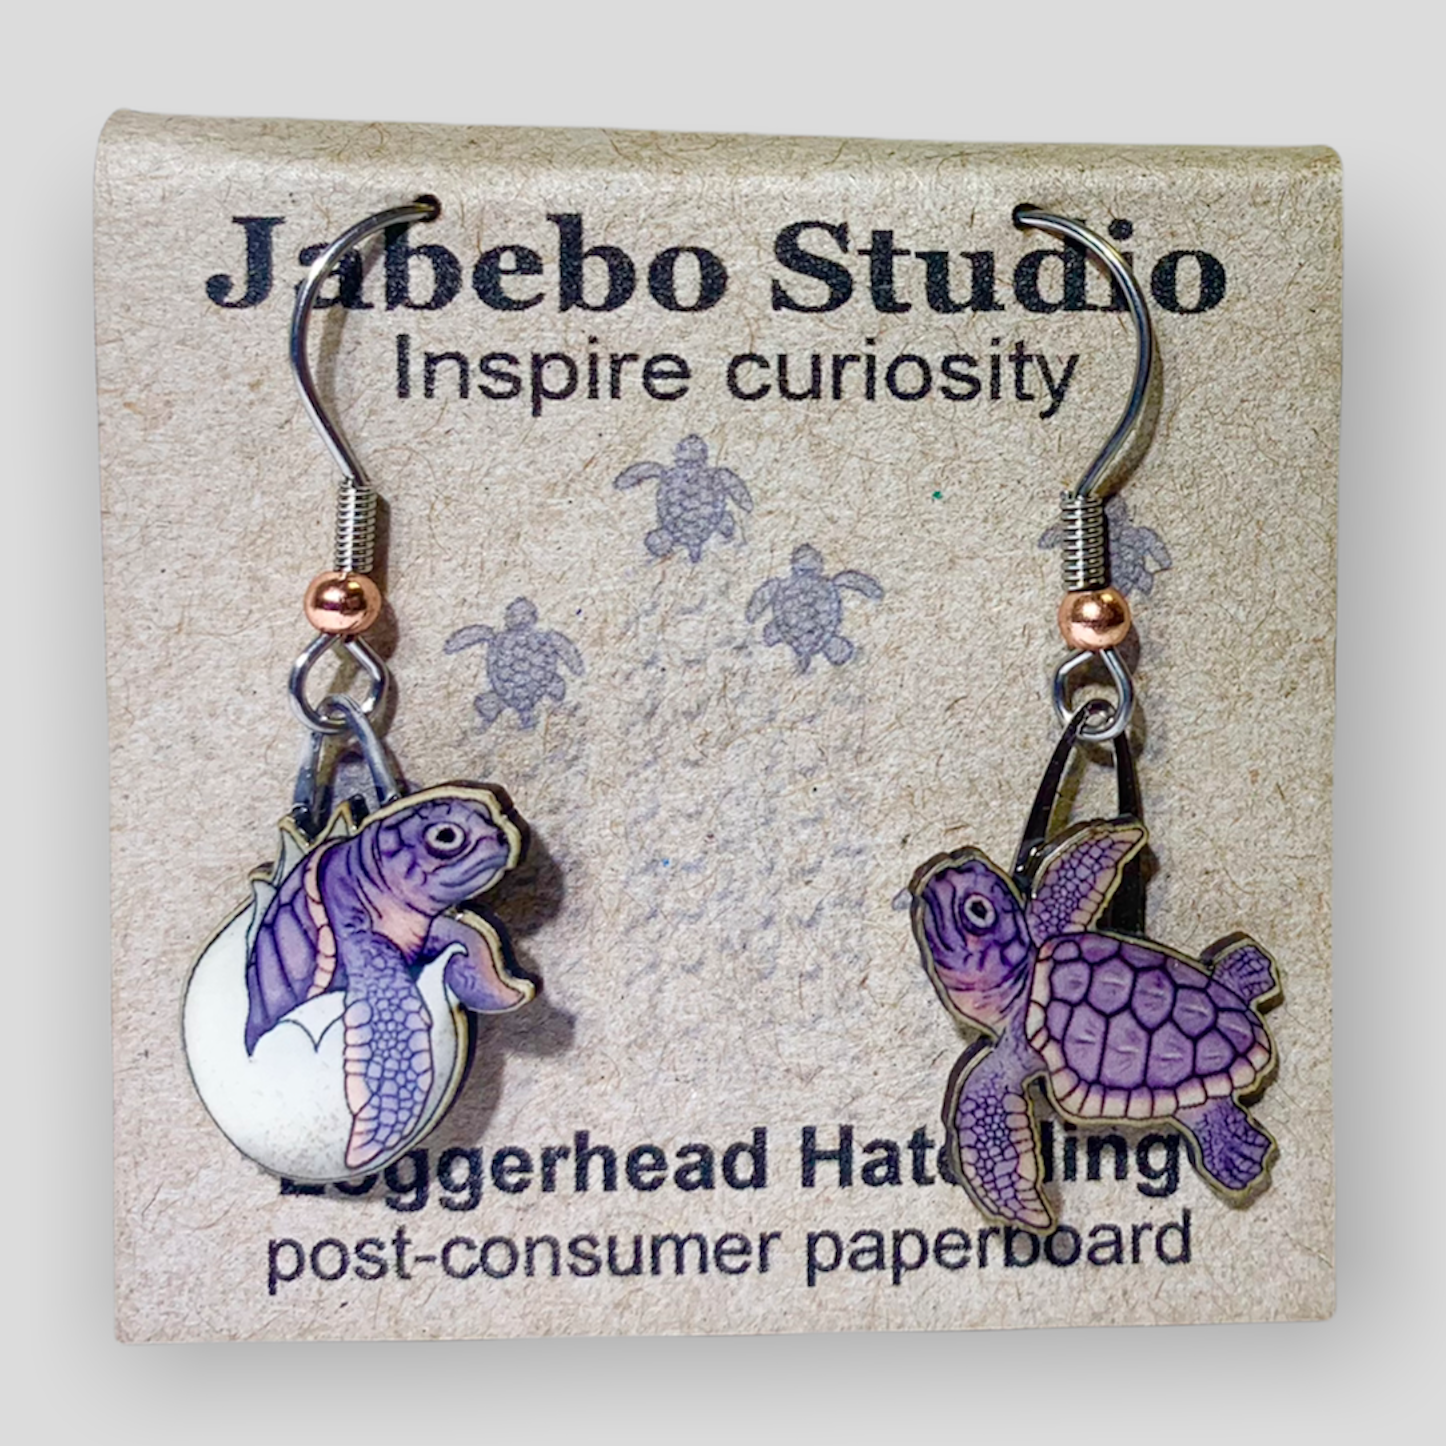 Picture shown is of 1 inch tall pair of earrings of the marine animal the Loggerhead Hatchling.